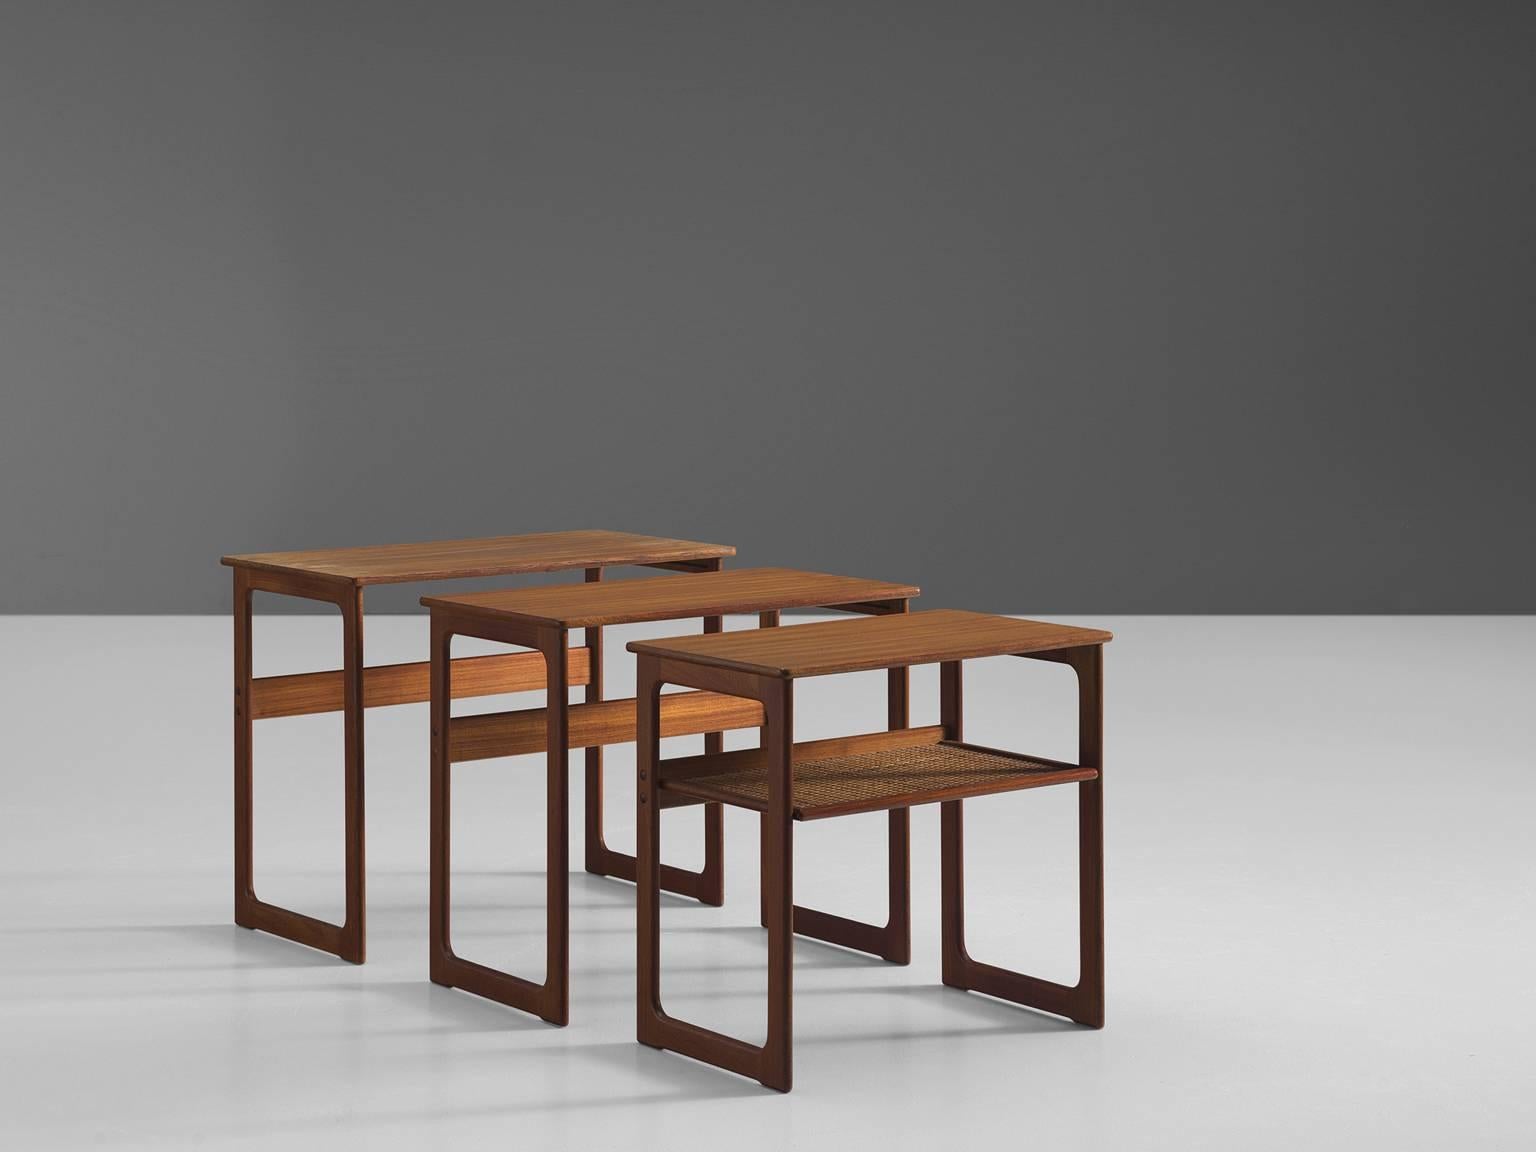 Designed by Johannes Andersen and Illum Wikkelsø for manufacturer CFC Silkeborg.

This gracious set of side tables is designed by Johannes Andersen and Illum Wikkelsø for CFC Silkeborg. The nesting tables feature open rectangles on both side of